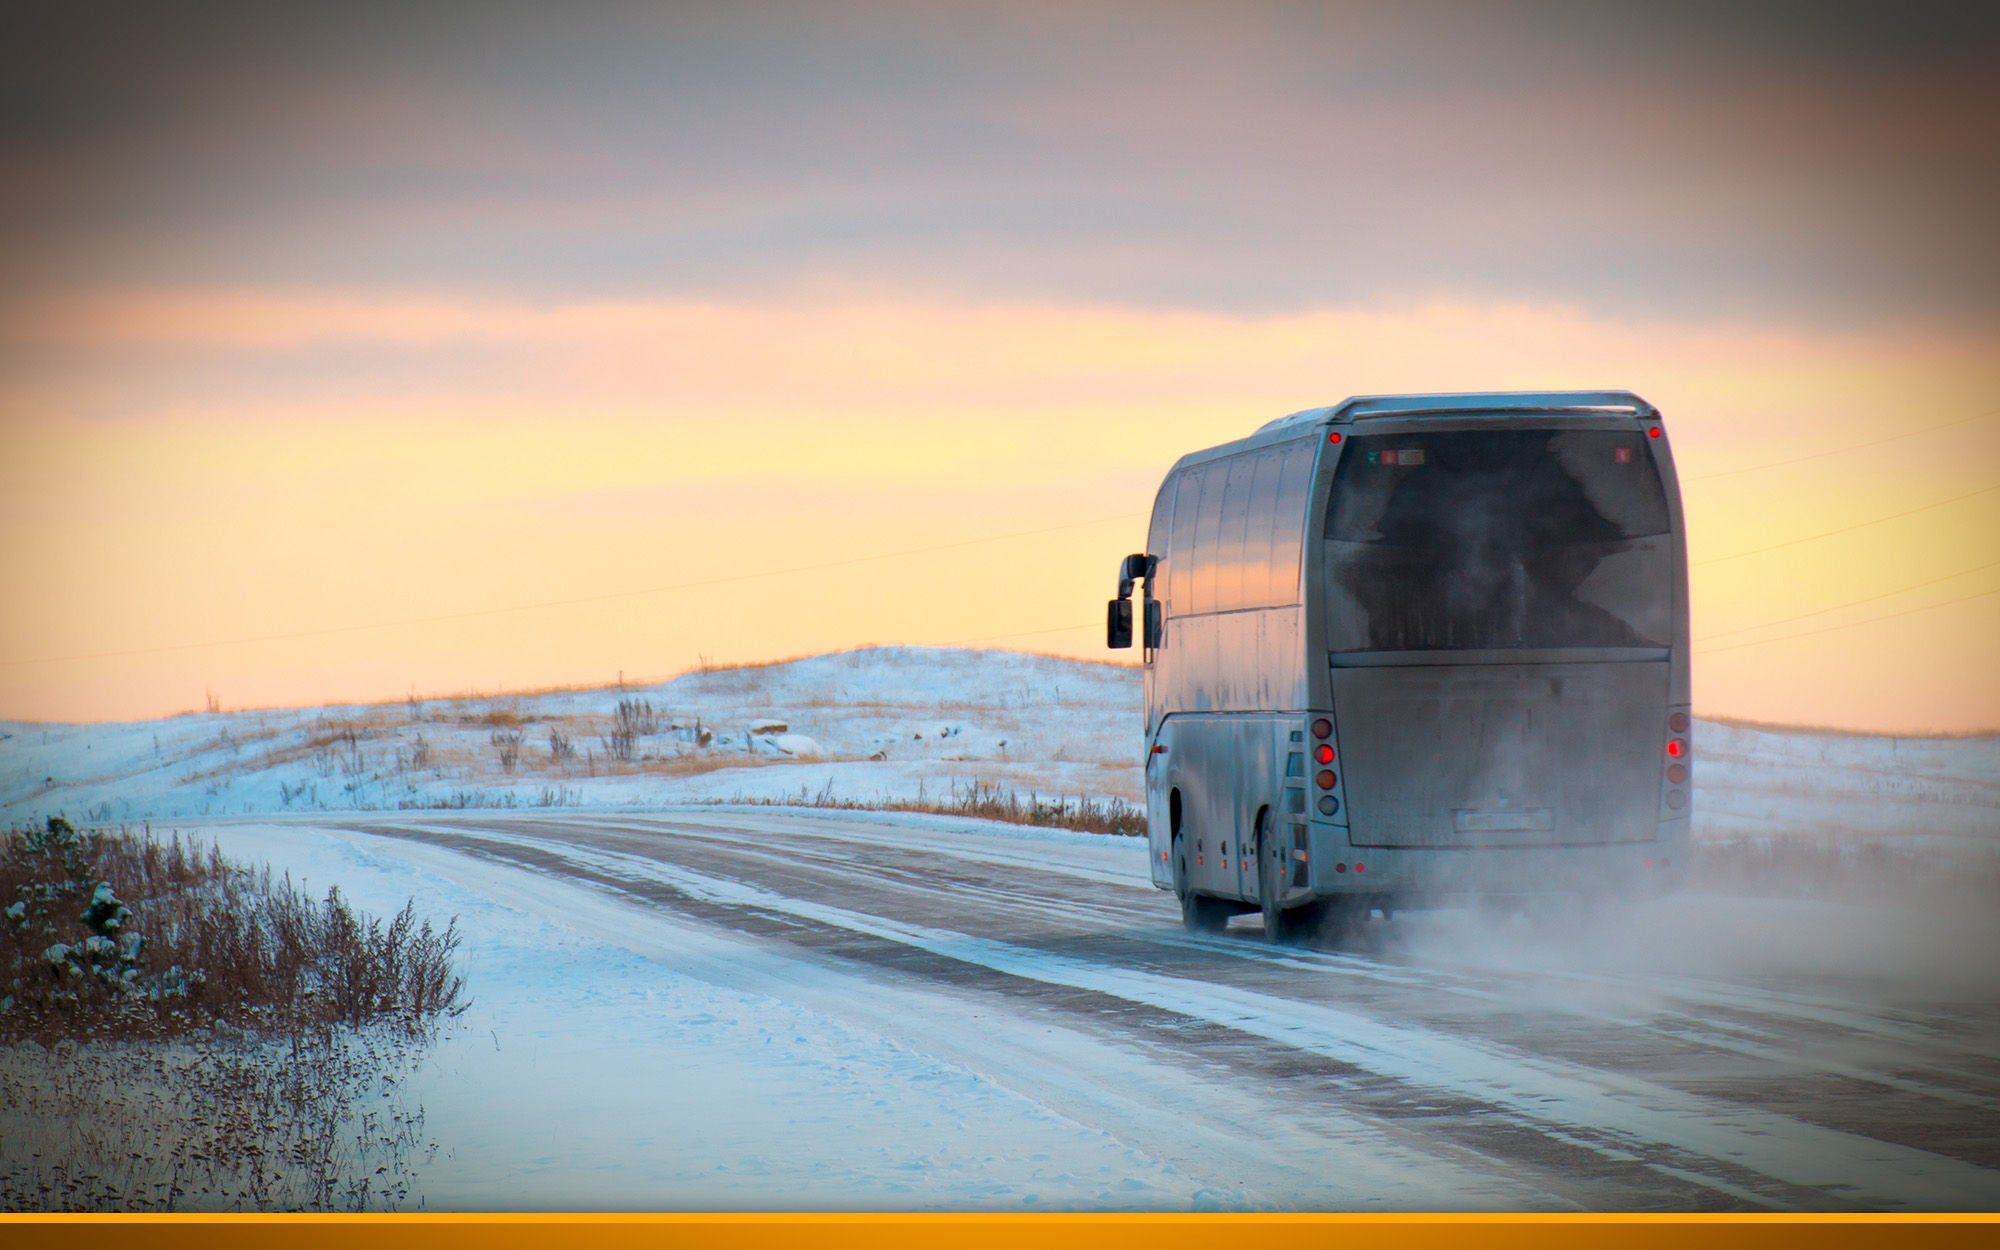 Bus driving on winter roads